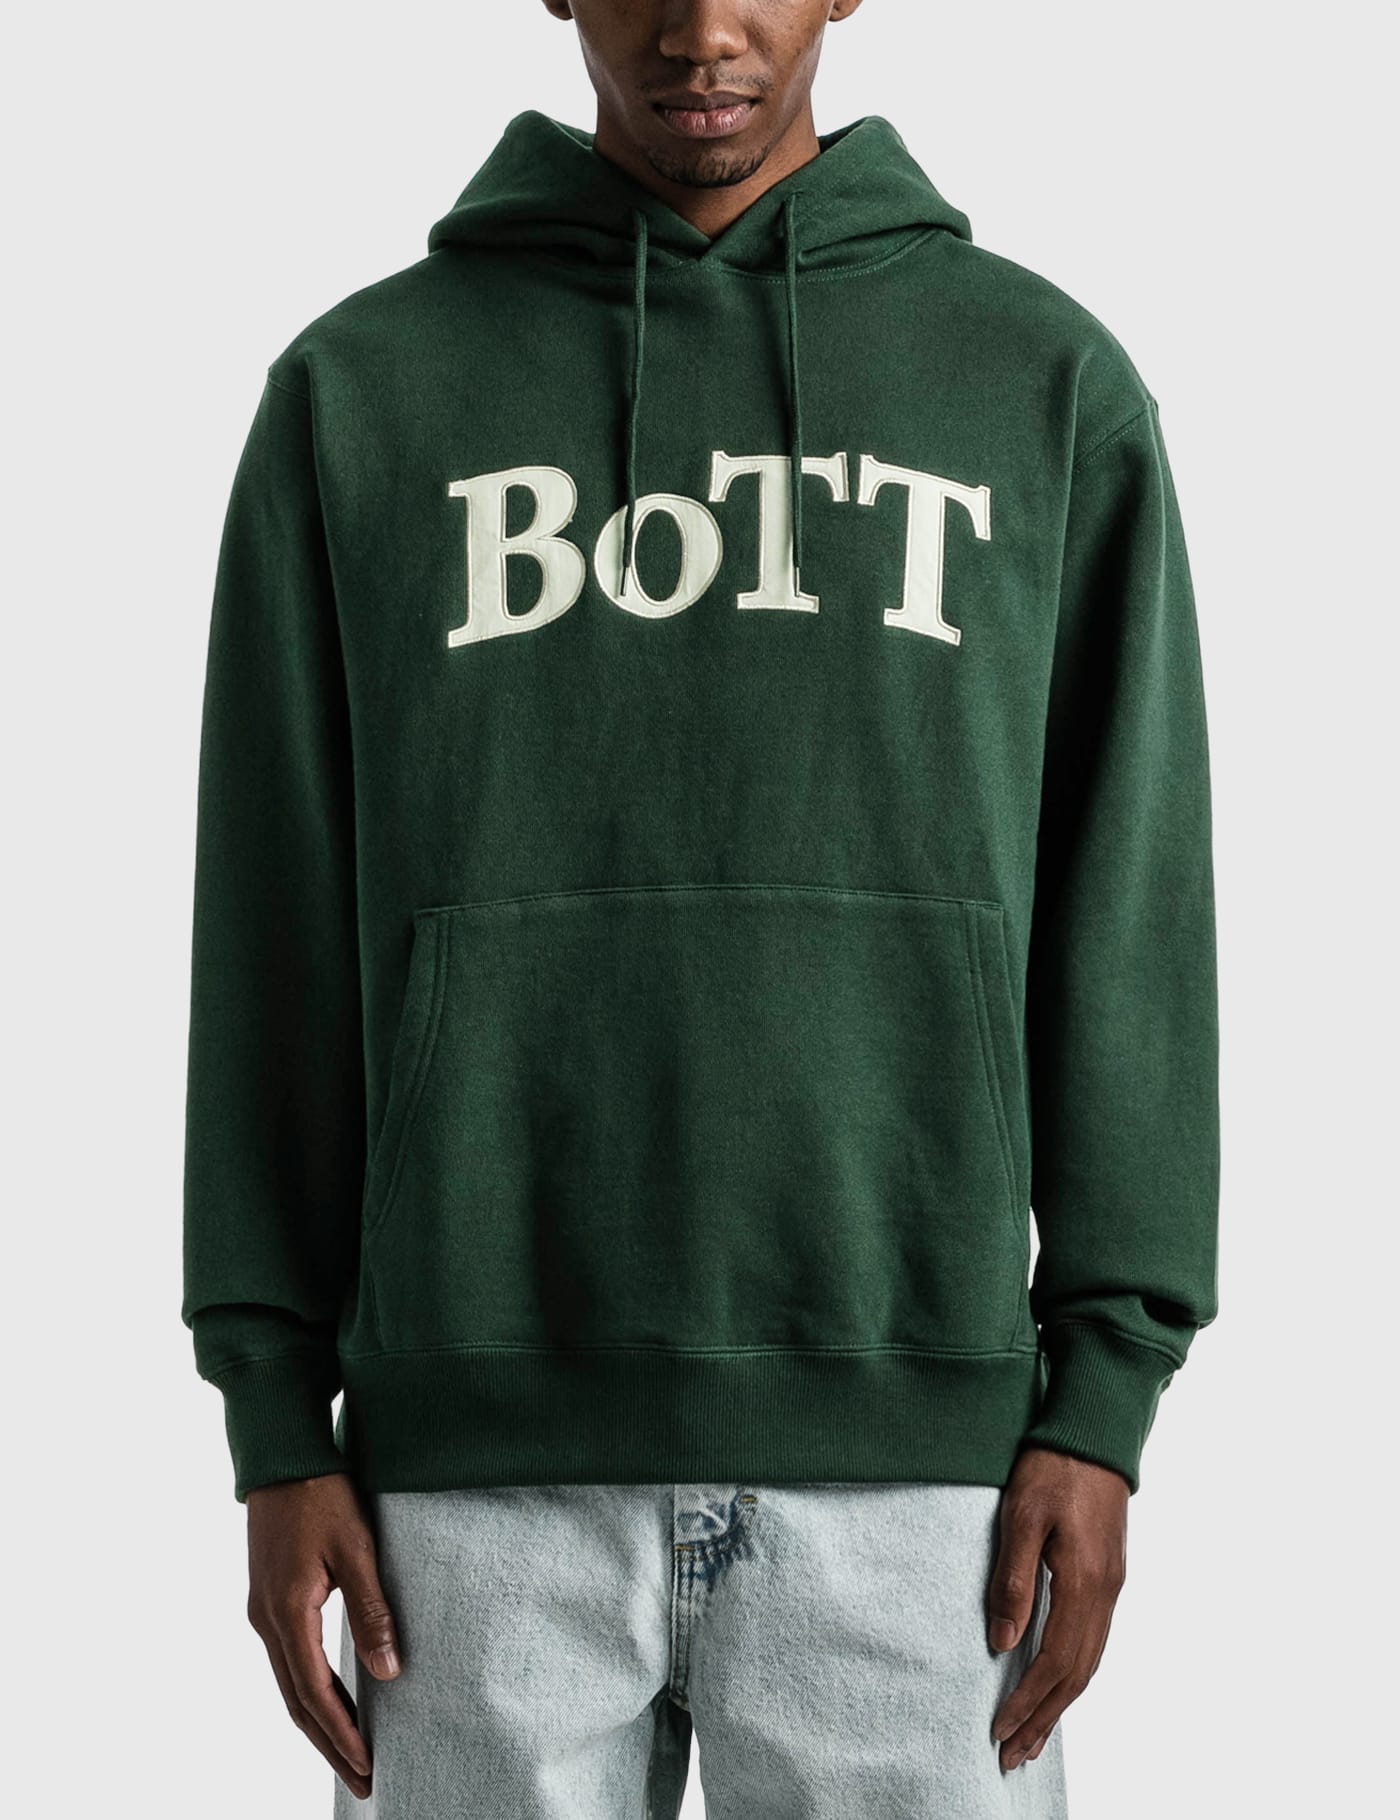 BoTT - OG LOGO HOODIE | HBX - Globally Curated Fashion and